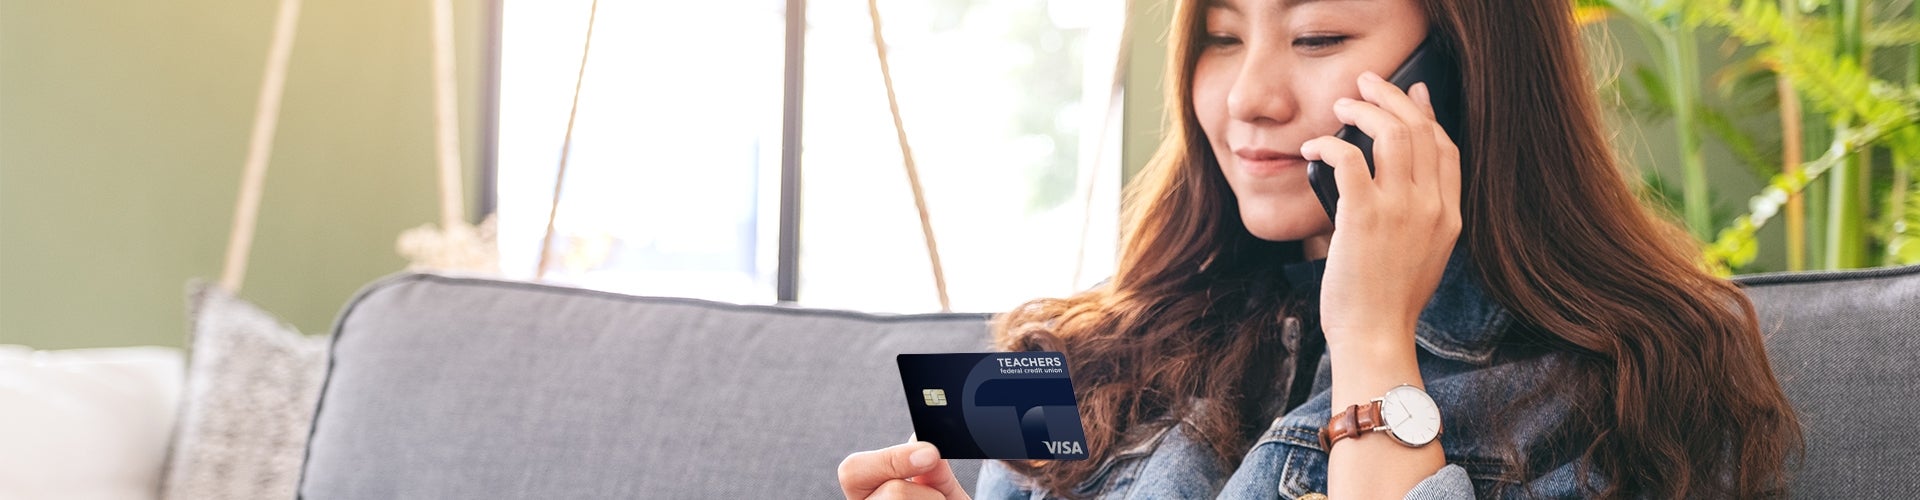 The Teachers student visa card is a credit card ideal for student borrowers looking to build their credit